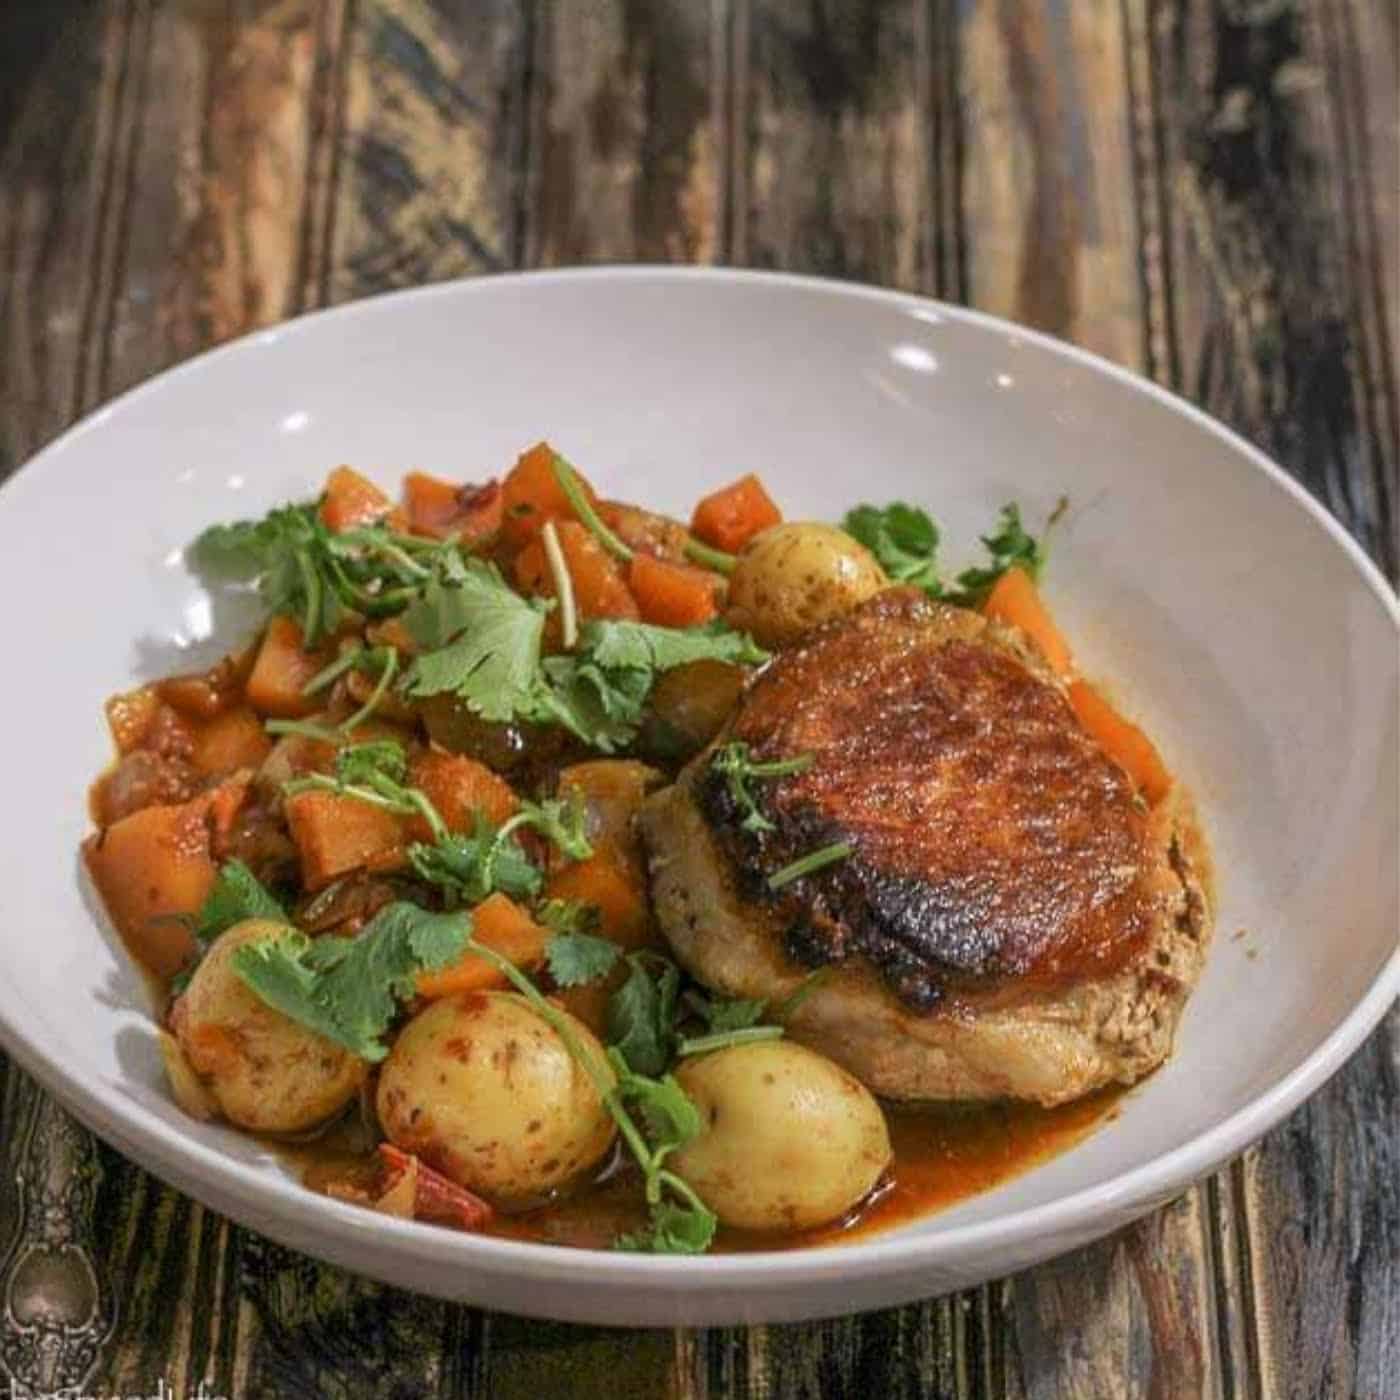 Mexican citrus drenched pork chops over butternut squash and potatoes